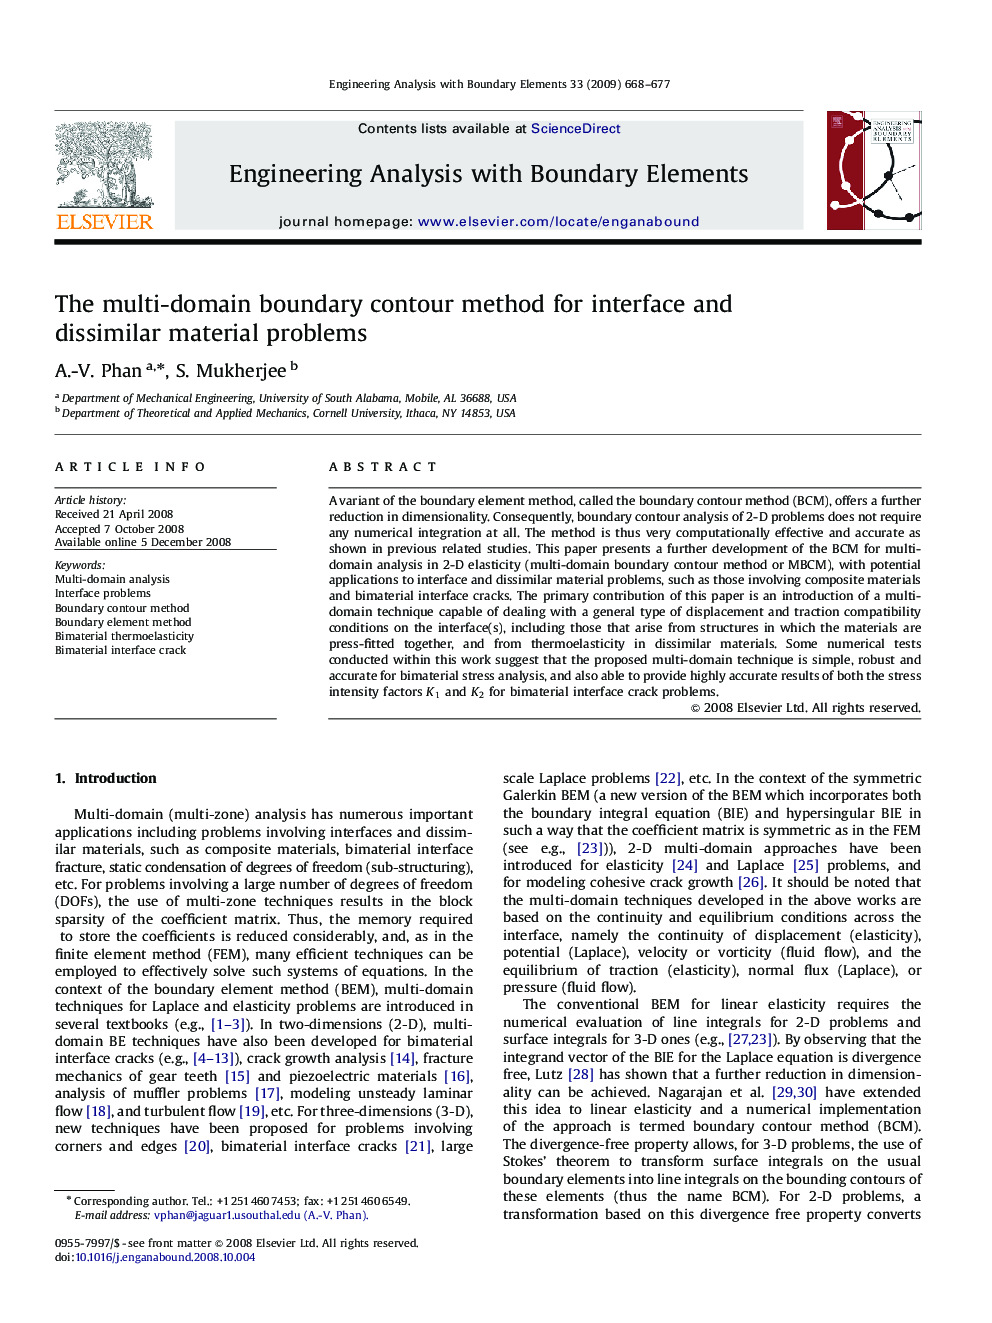 The multi-domain boundary contour method for interface and dissimilar material problems